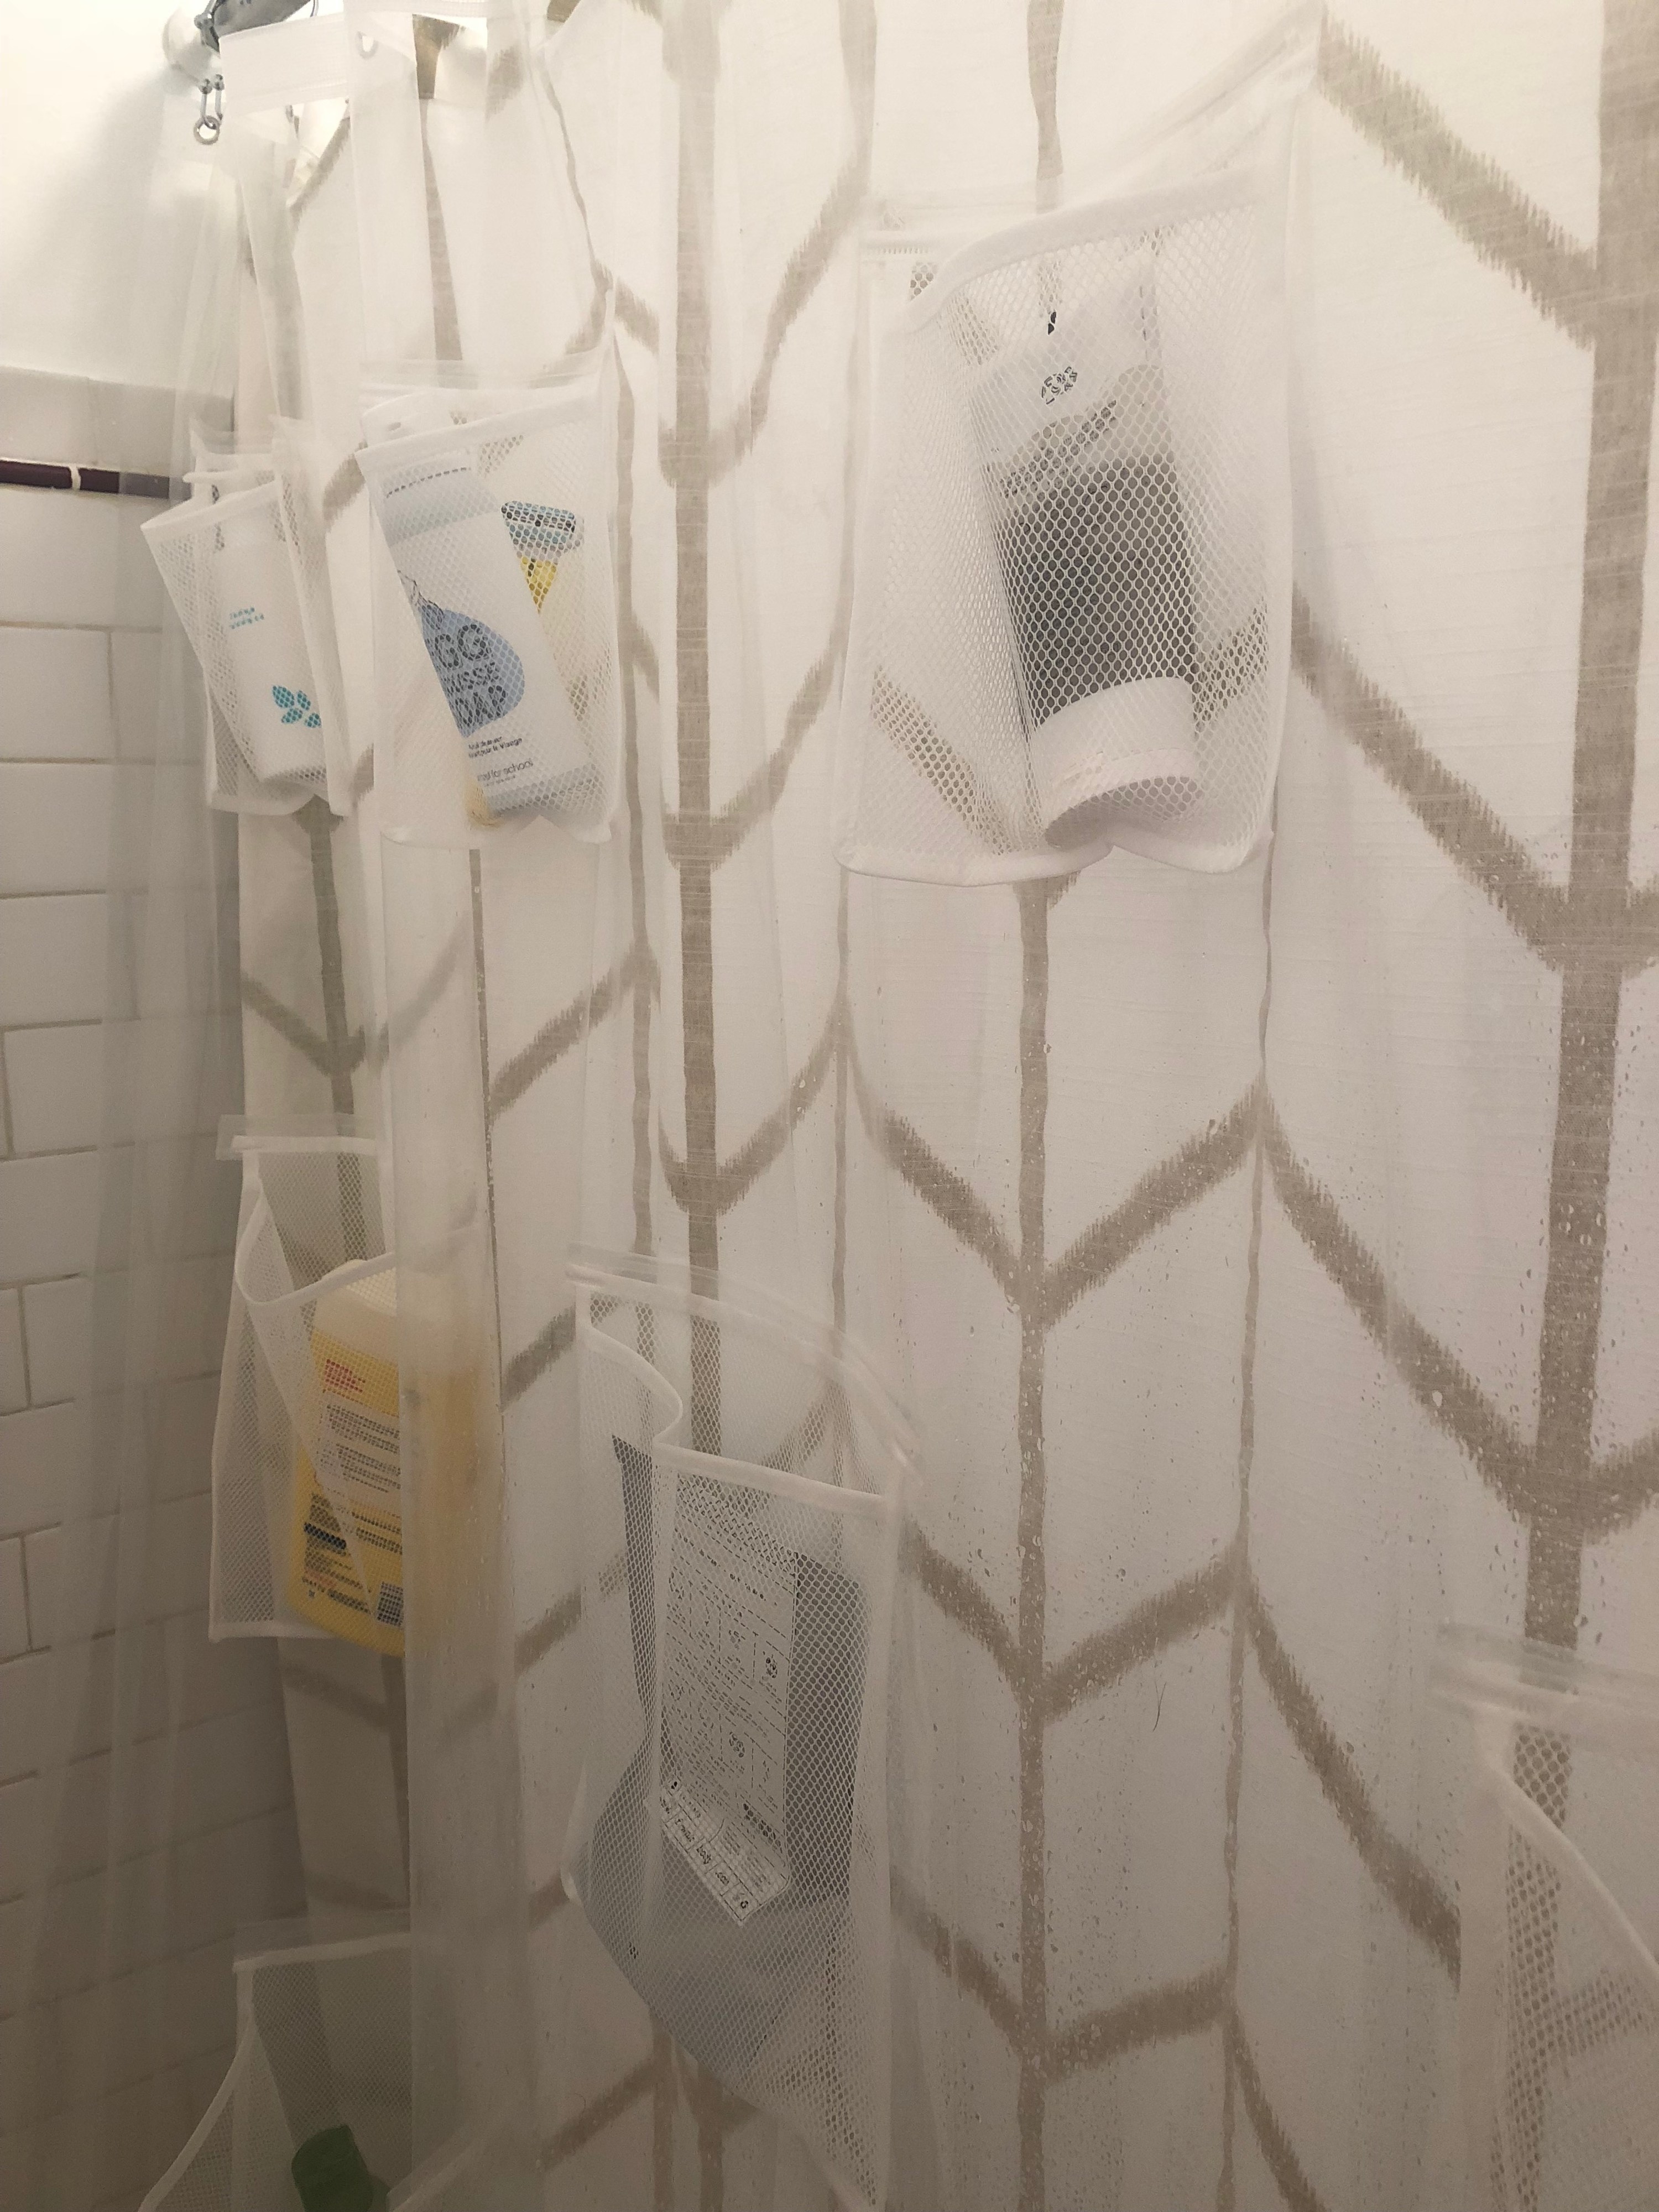 shower with the translucent shower curtain liner hanging up. Various toiletries like shampoo and body wash are in its mesh storage pockets